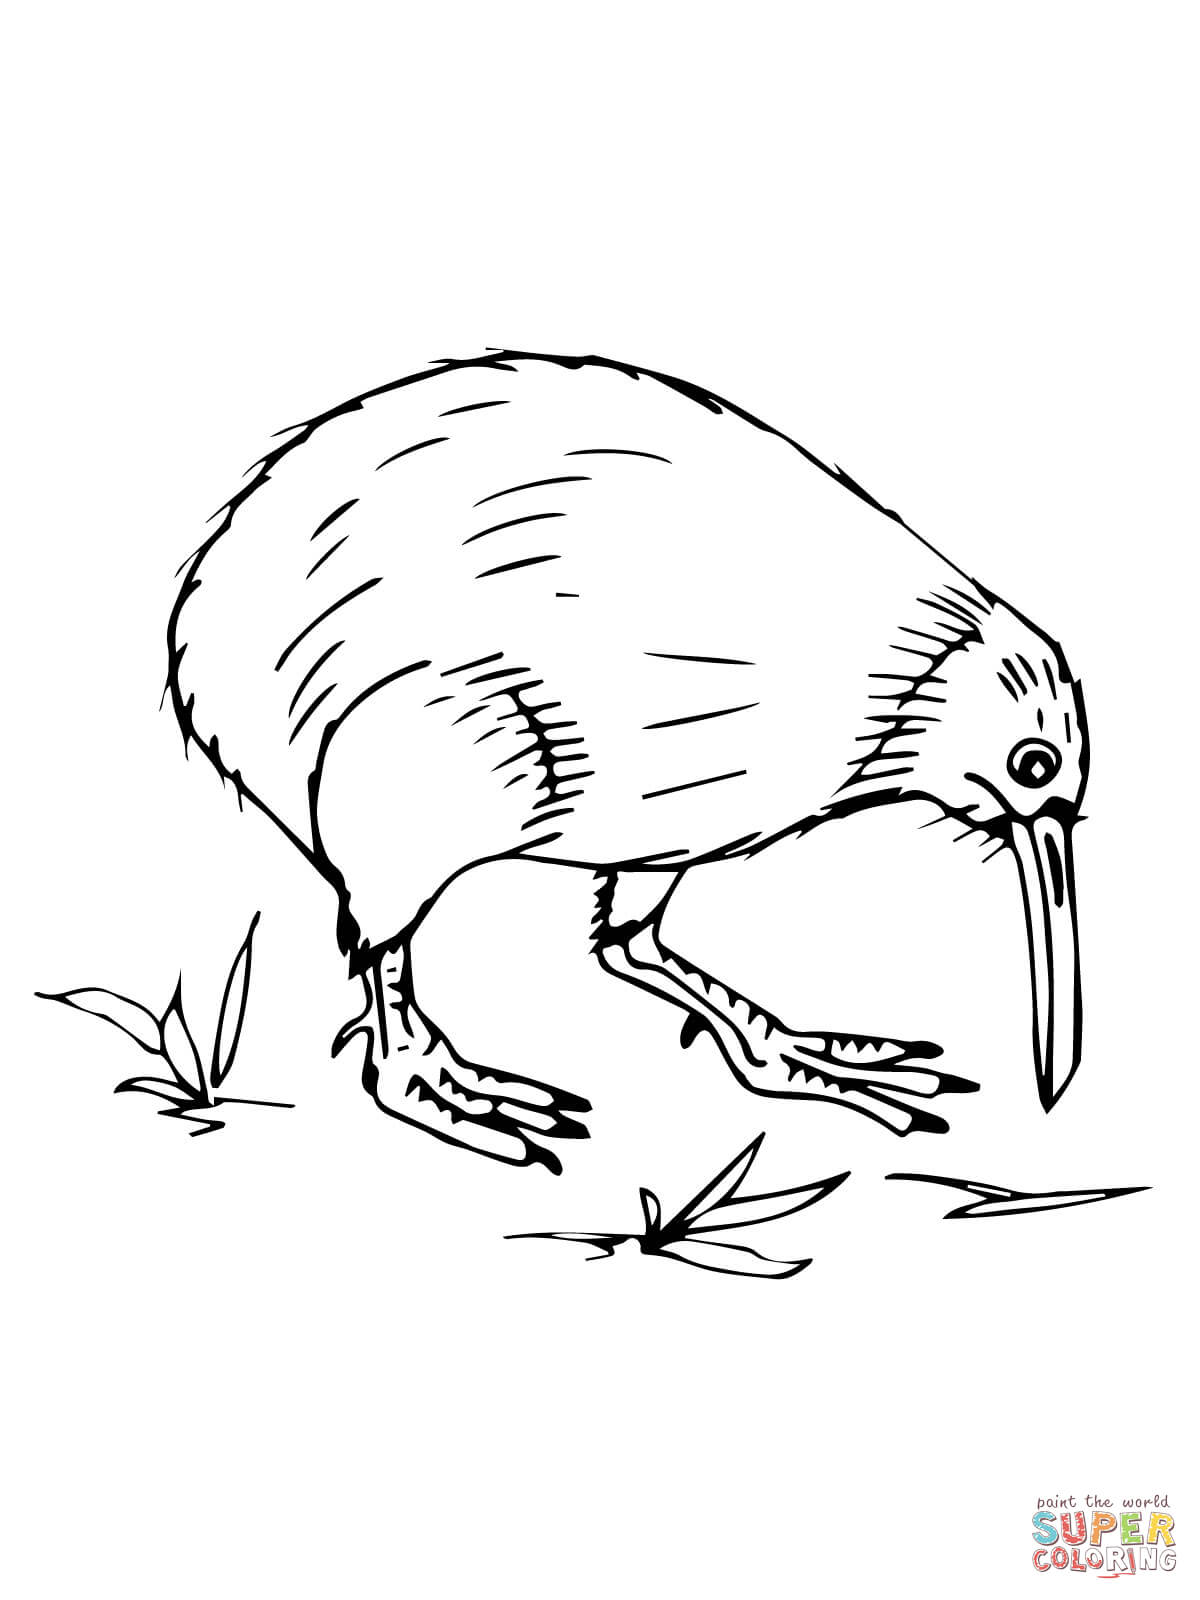 New Zealand Kiwi coloring page | Free Printable Coloring Pages